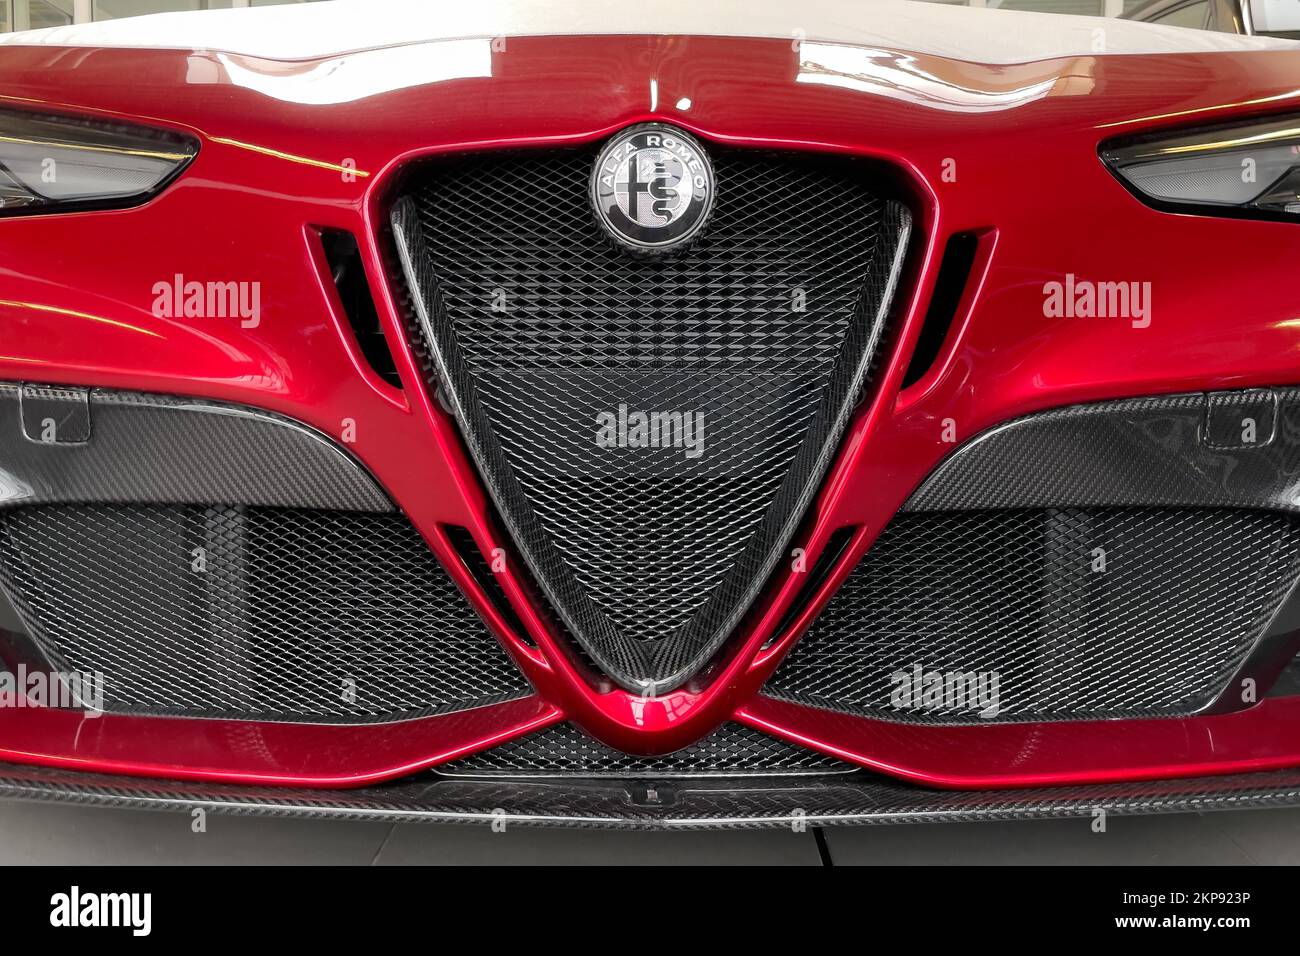 Details of front with black and white logo radiator grille Scudetto of limited to 500 pieces Italian sports car Alfa Romeo Giulia GTAm, Germany, Europ Stock Photo